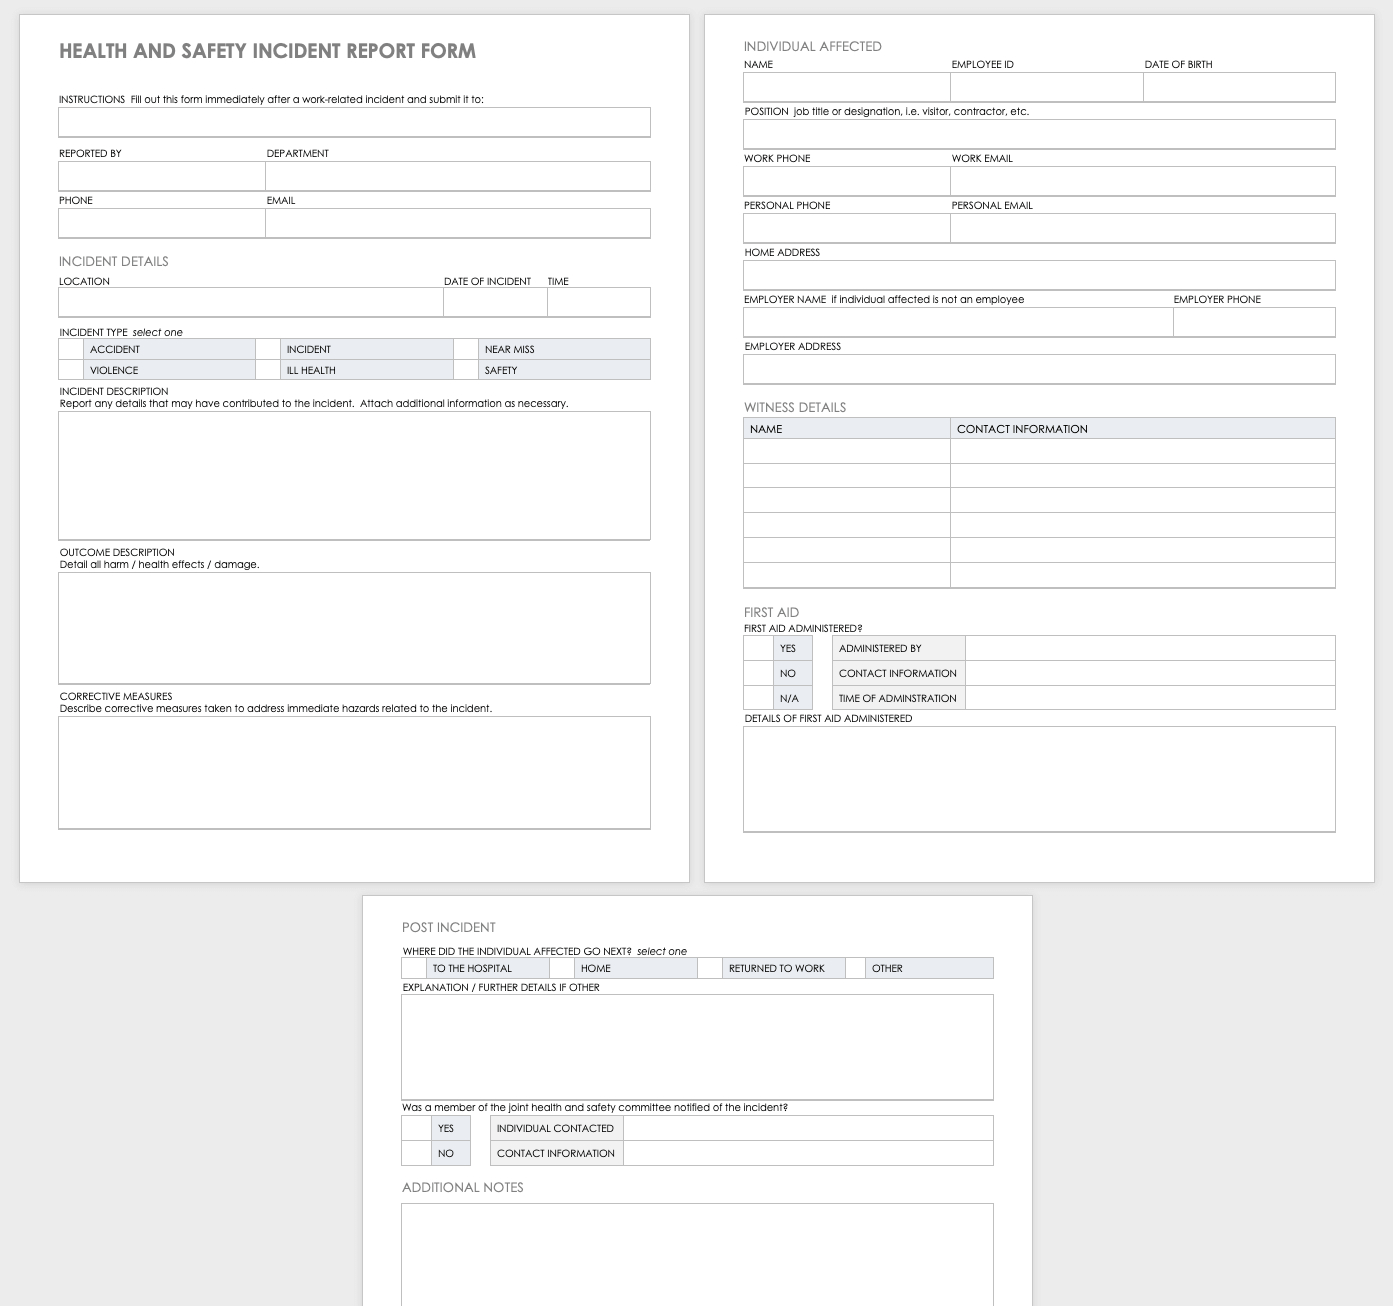 Free Workplace Accident Report Templates | Smartsheet With Regard To Incident Hazard Report Form Template